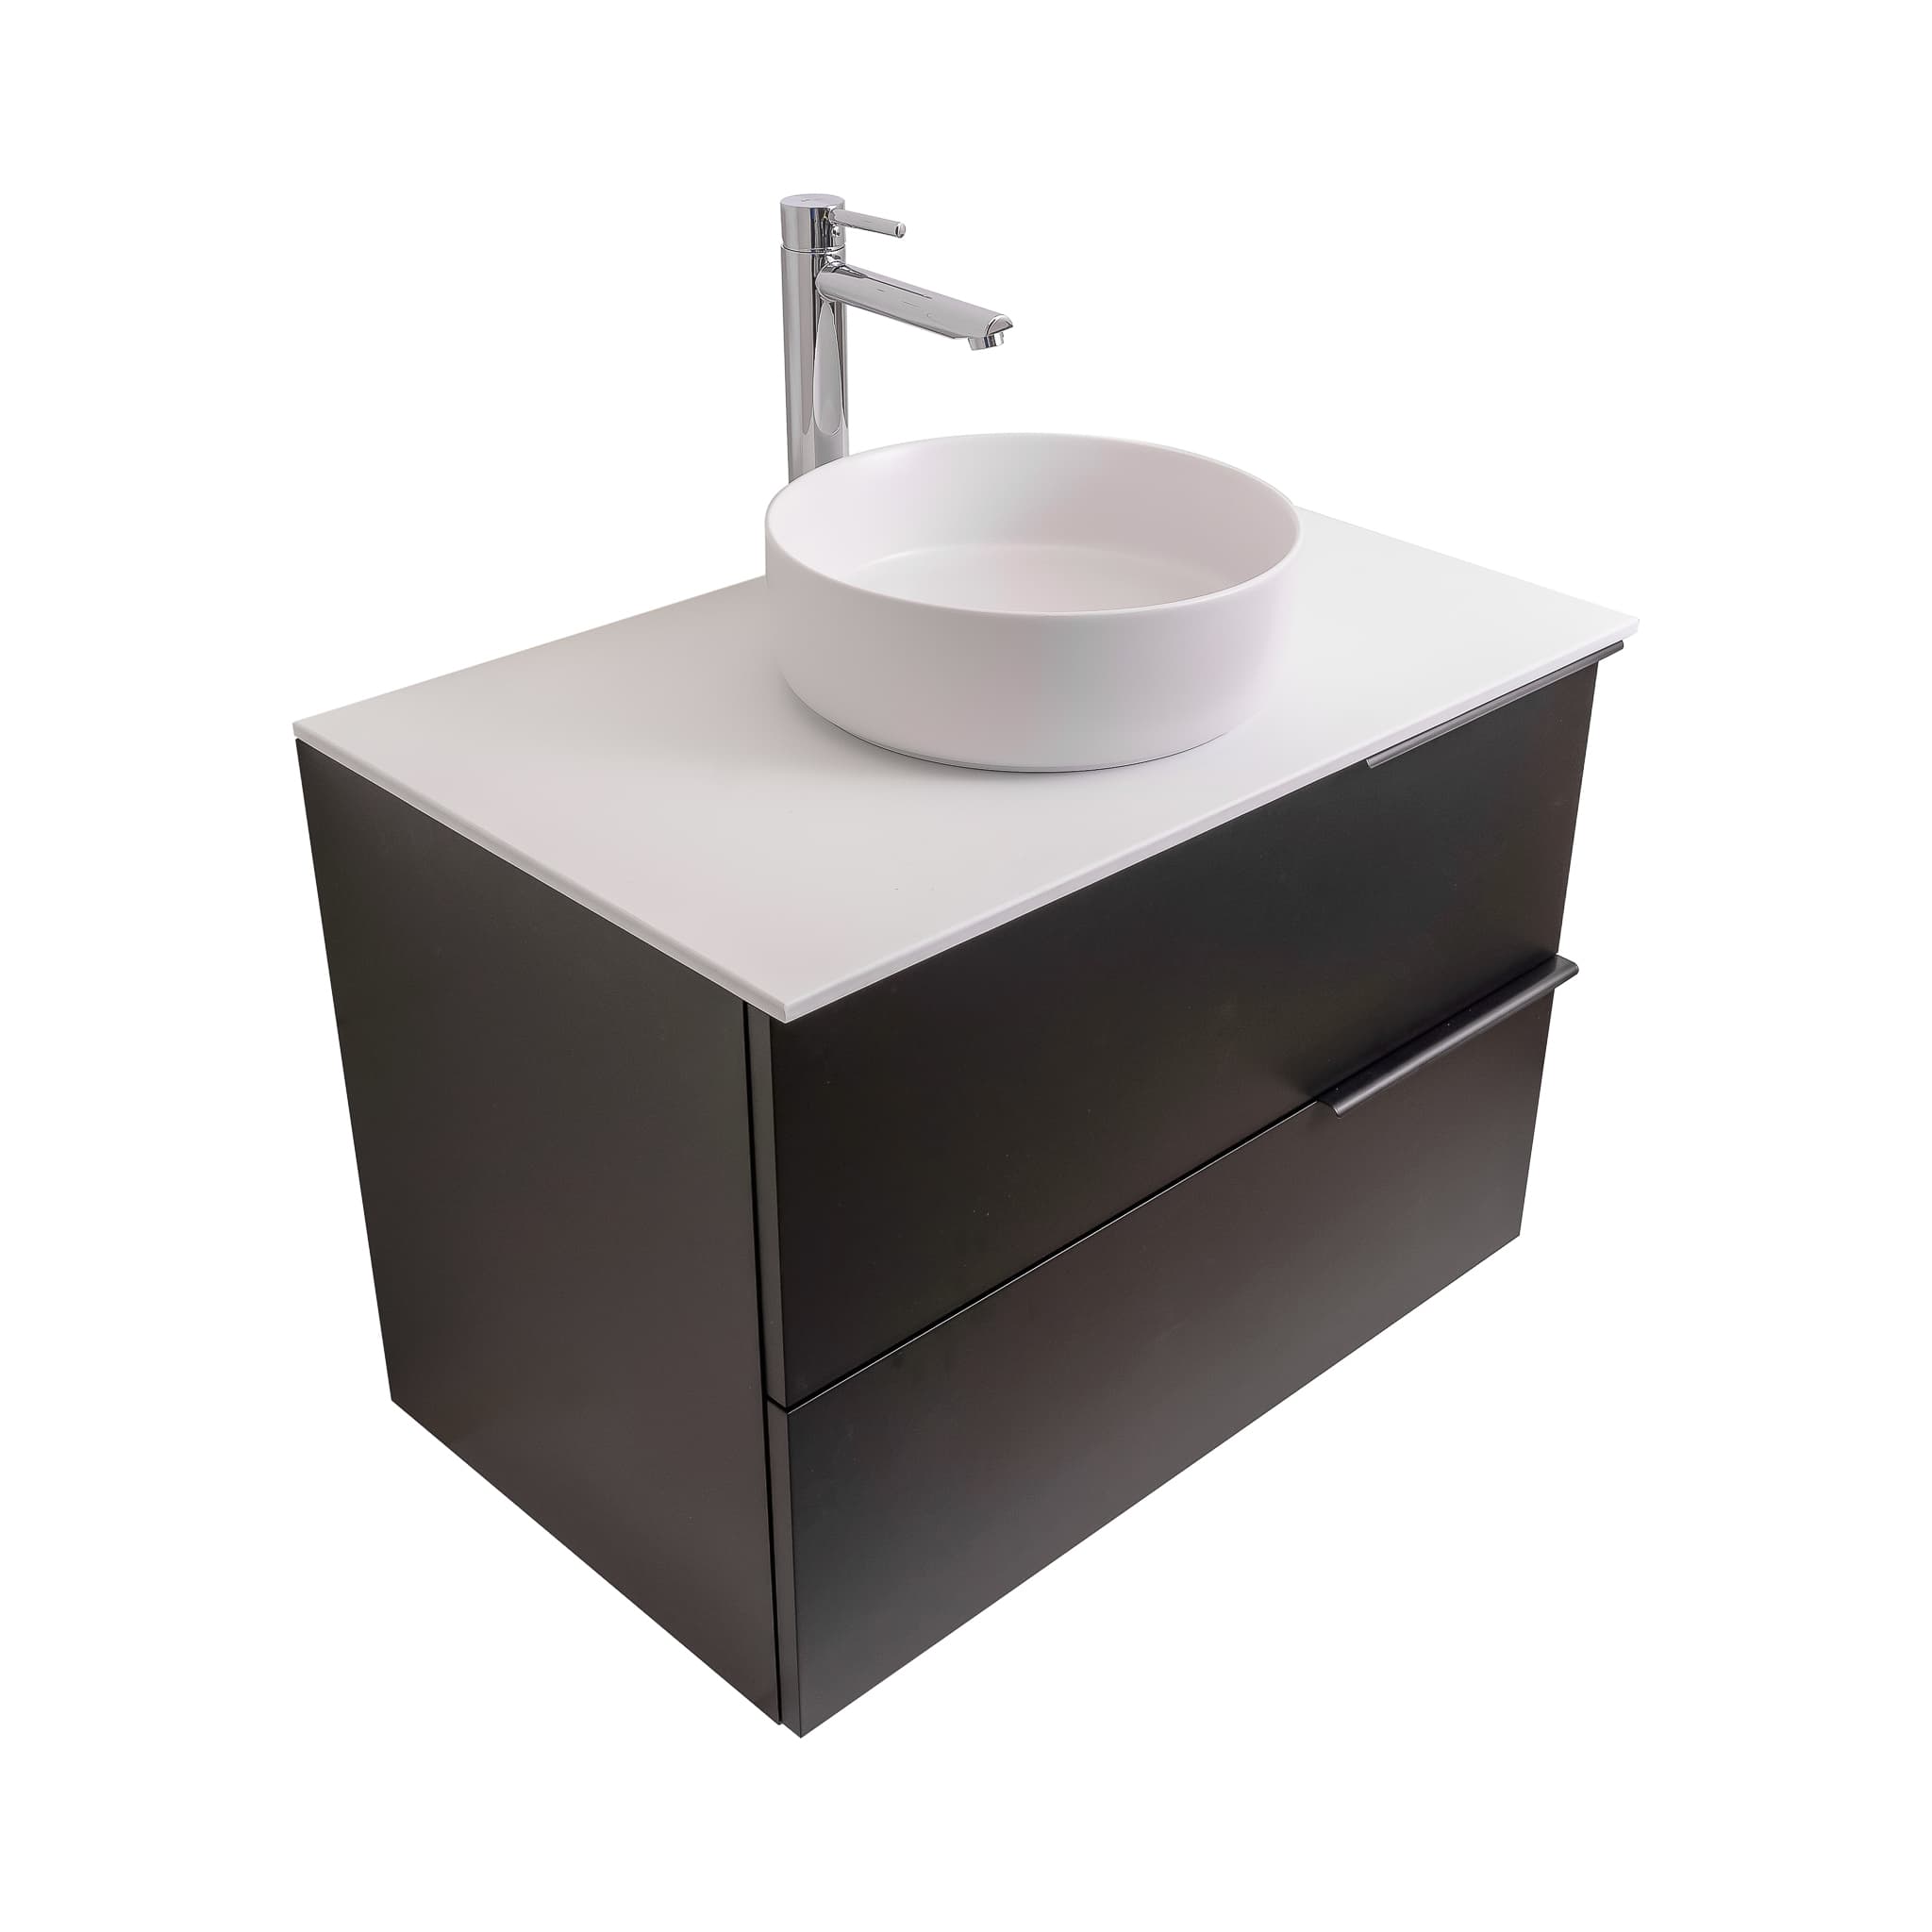 Mallorca 39.5 Matte Black Cabinet, Ares White Top And Ares White Ceramic Basin, Wall Mounted Modern Vanity Set